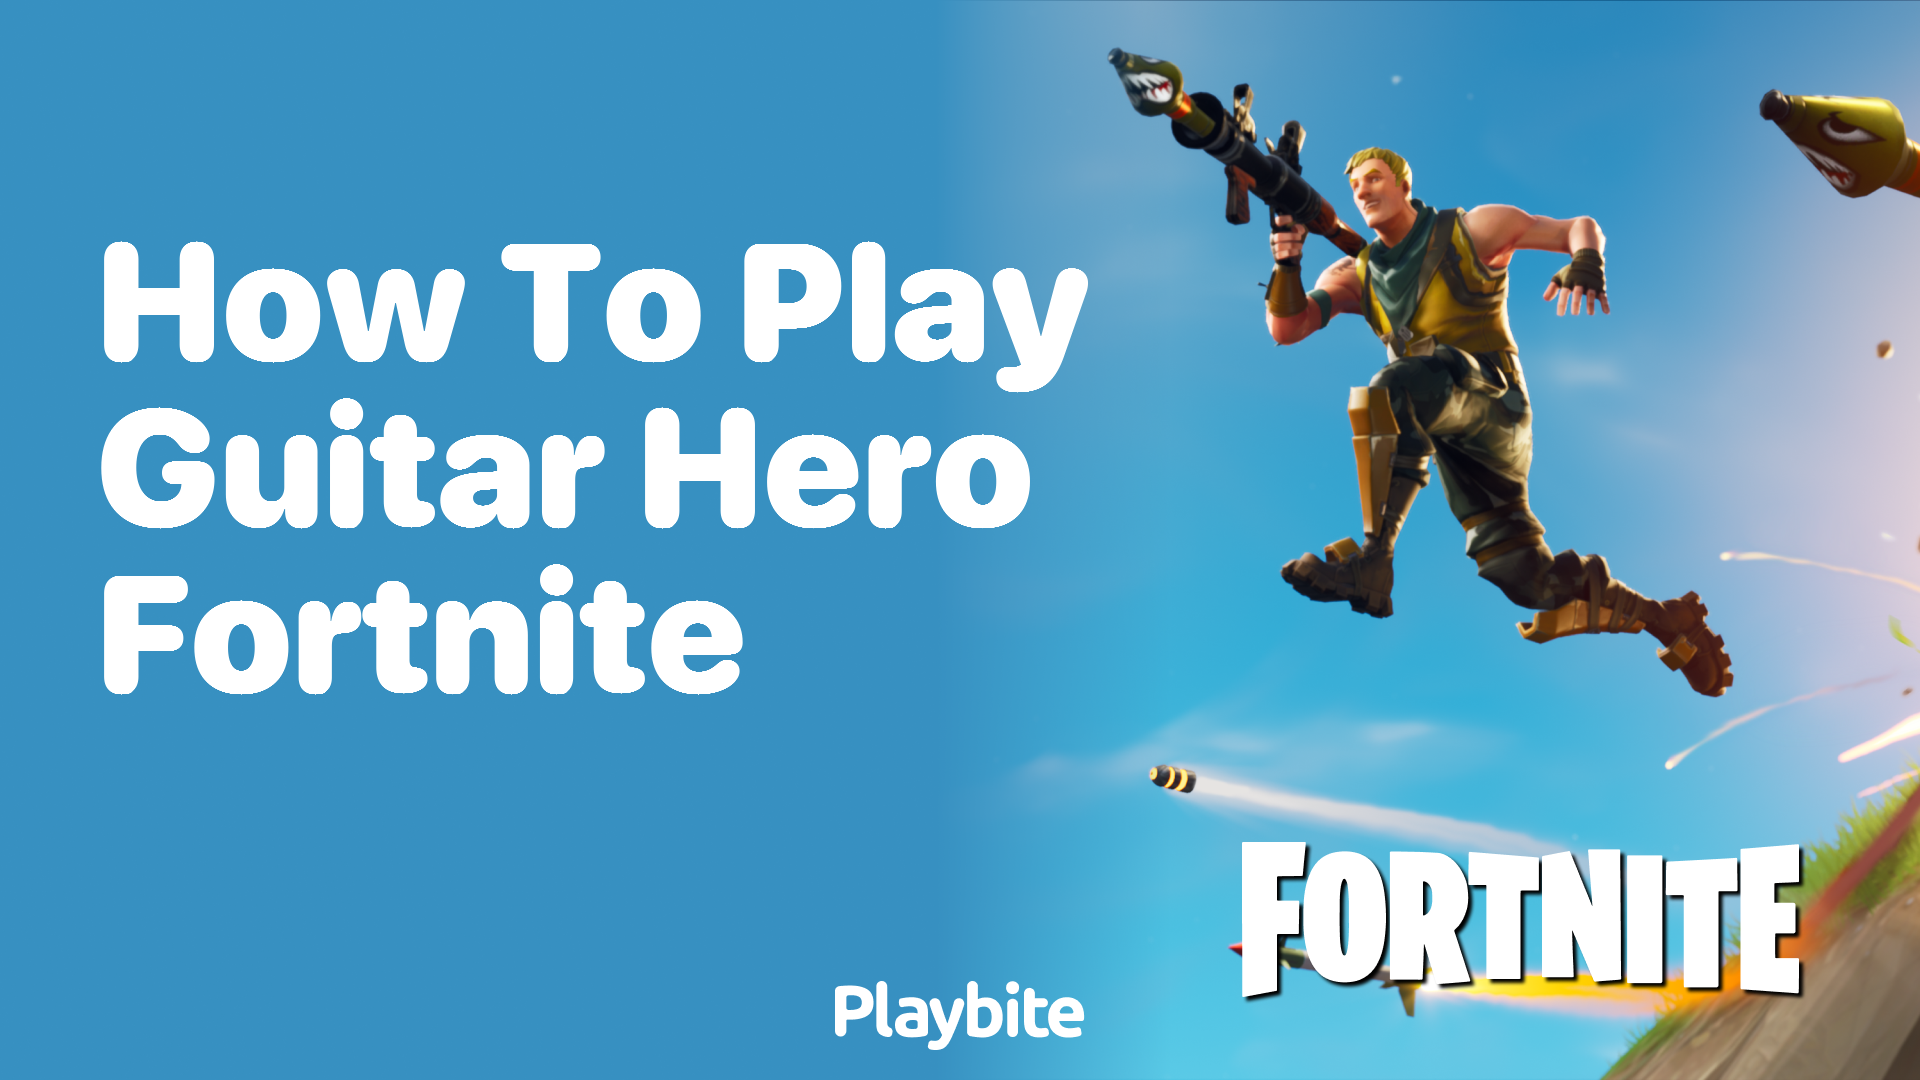 How to Play Guitar Hero in Fortnite: Rocking the Game!